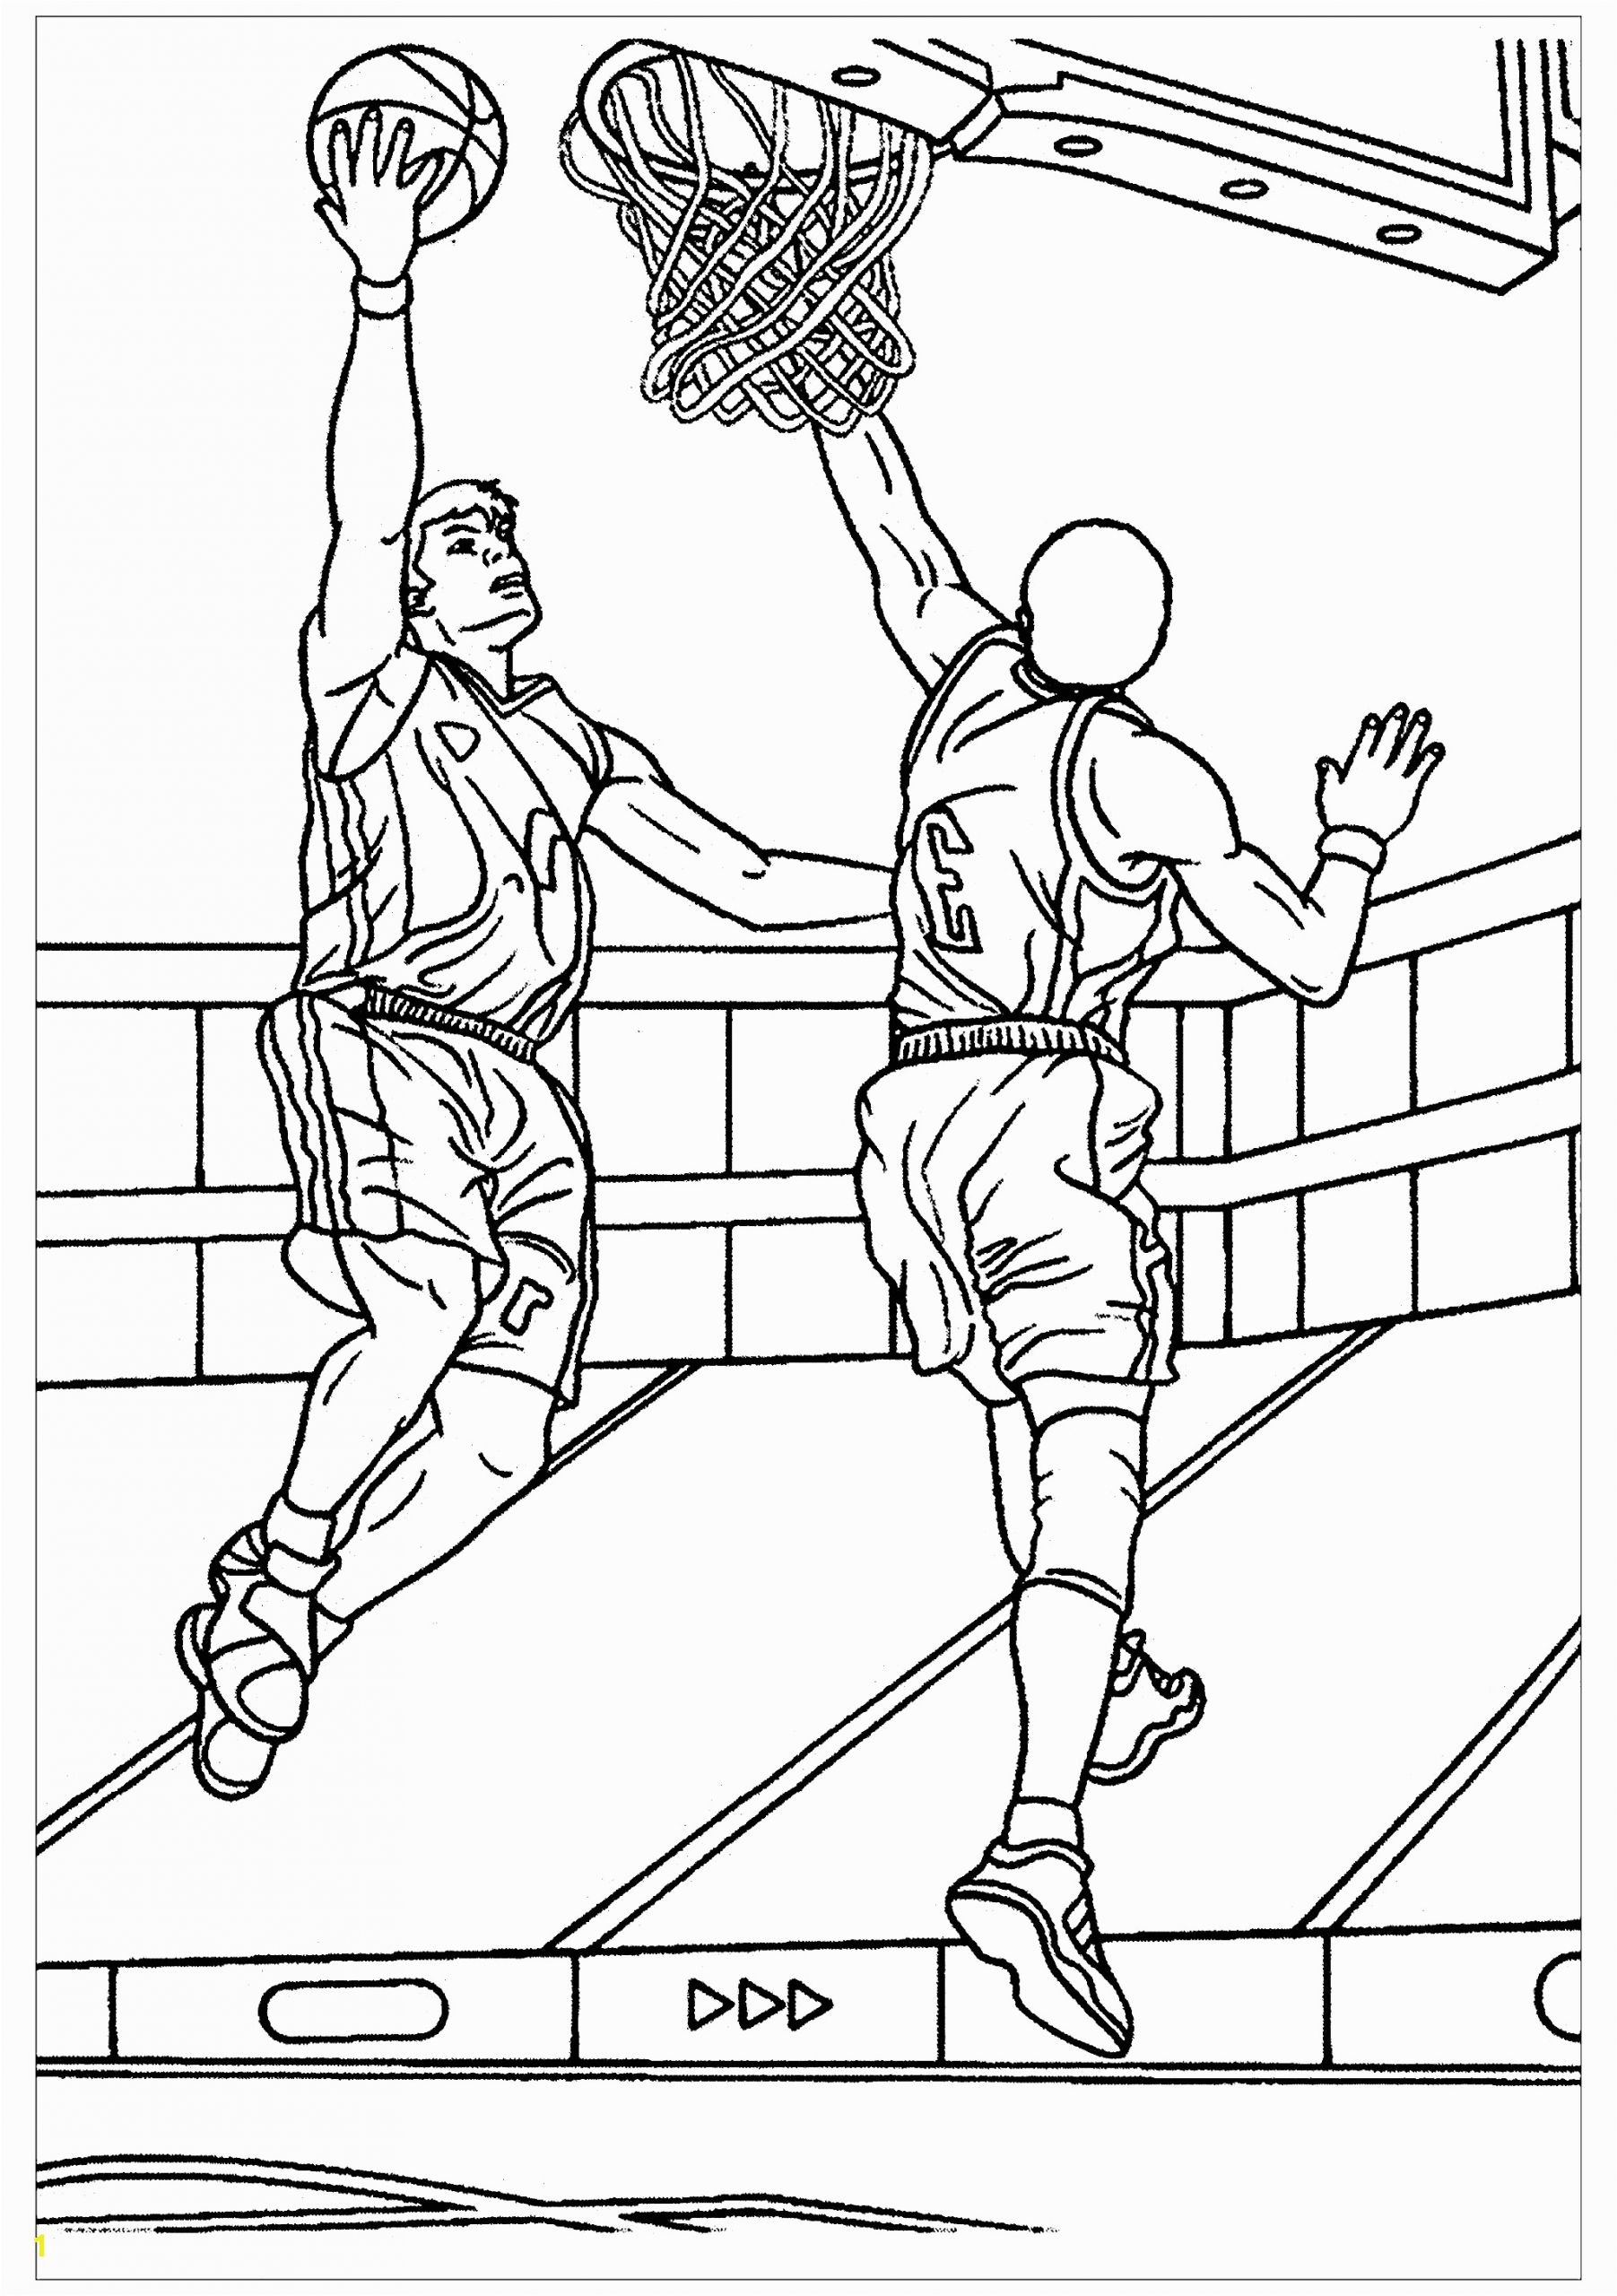 Basketball Coloring Pages for Kids Printable Basketball to Color for Children Basketball Kids